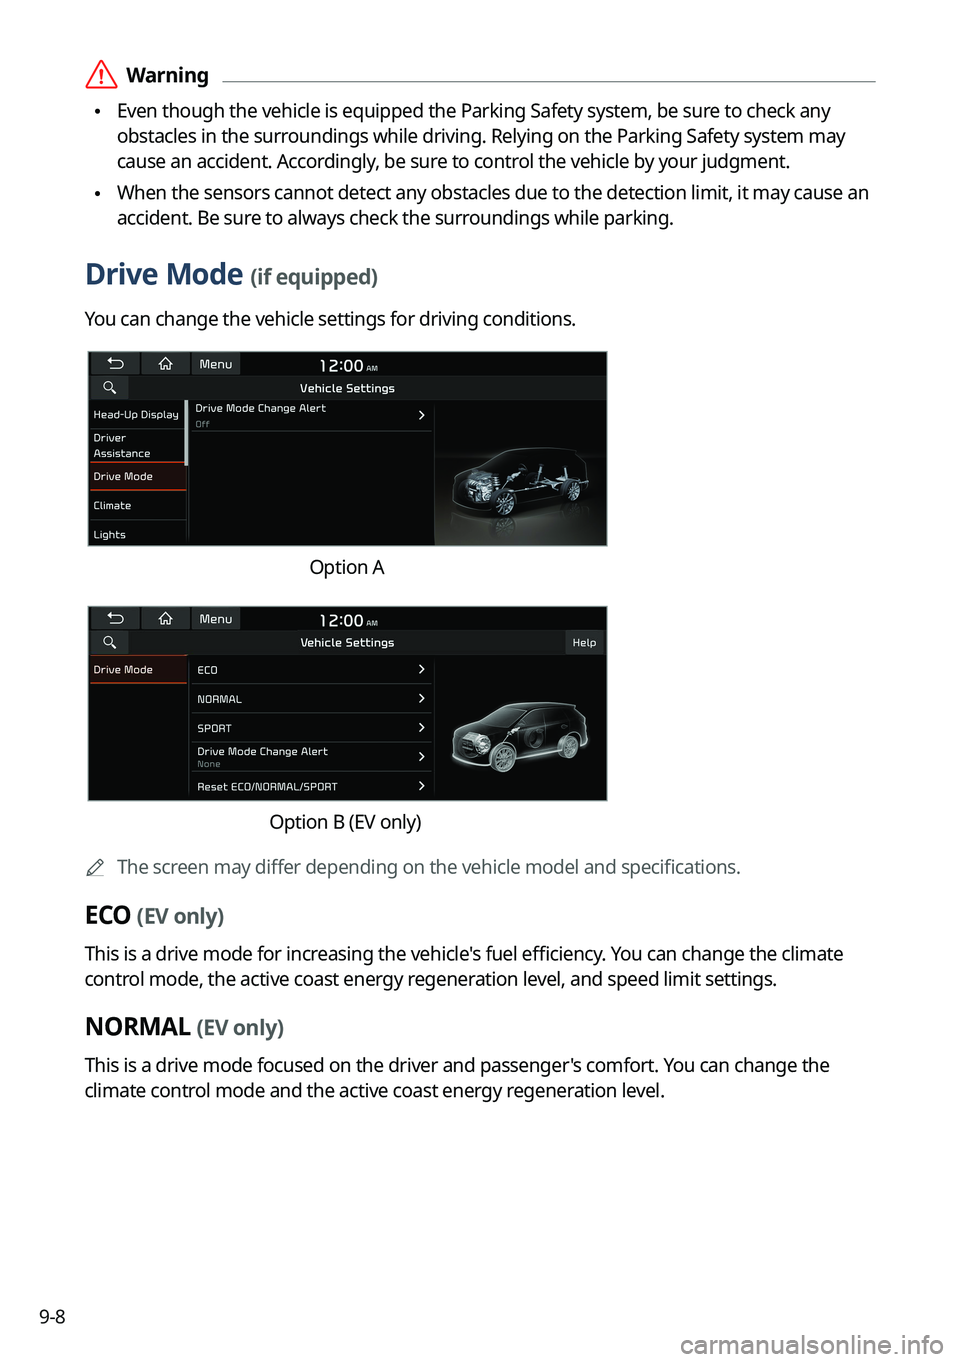 KIA NIRO PHEV 2022  Navigation System Quick Reference Guide 9-8
 ÝWarning
 •Even though the vehicle is equipped the Parking Safety system, be sure to check any 
obstacles in the surroundings while driving. Relying on the Parking Safety system may 
cause an 